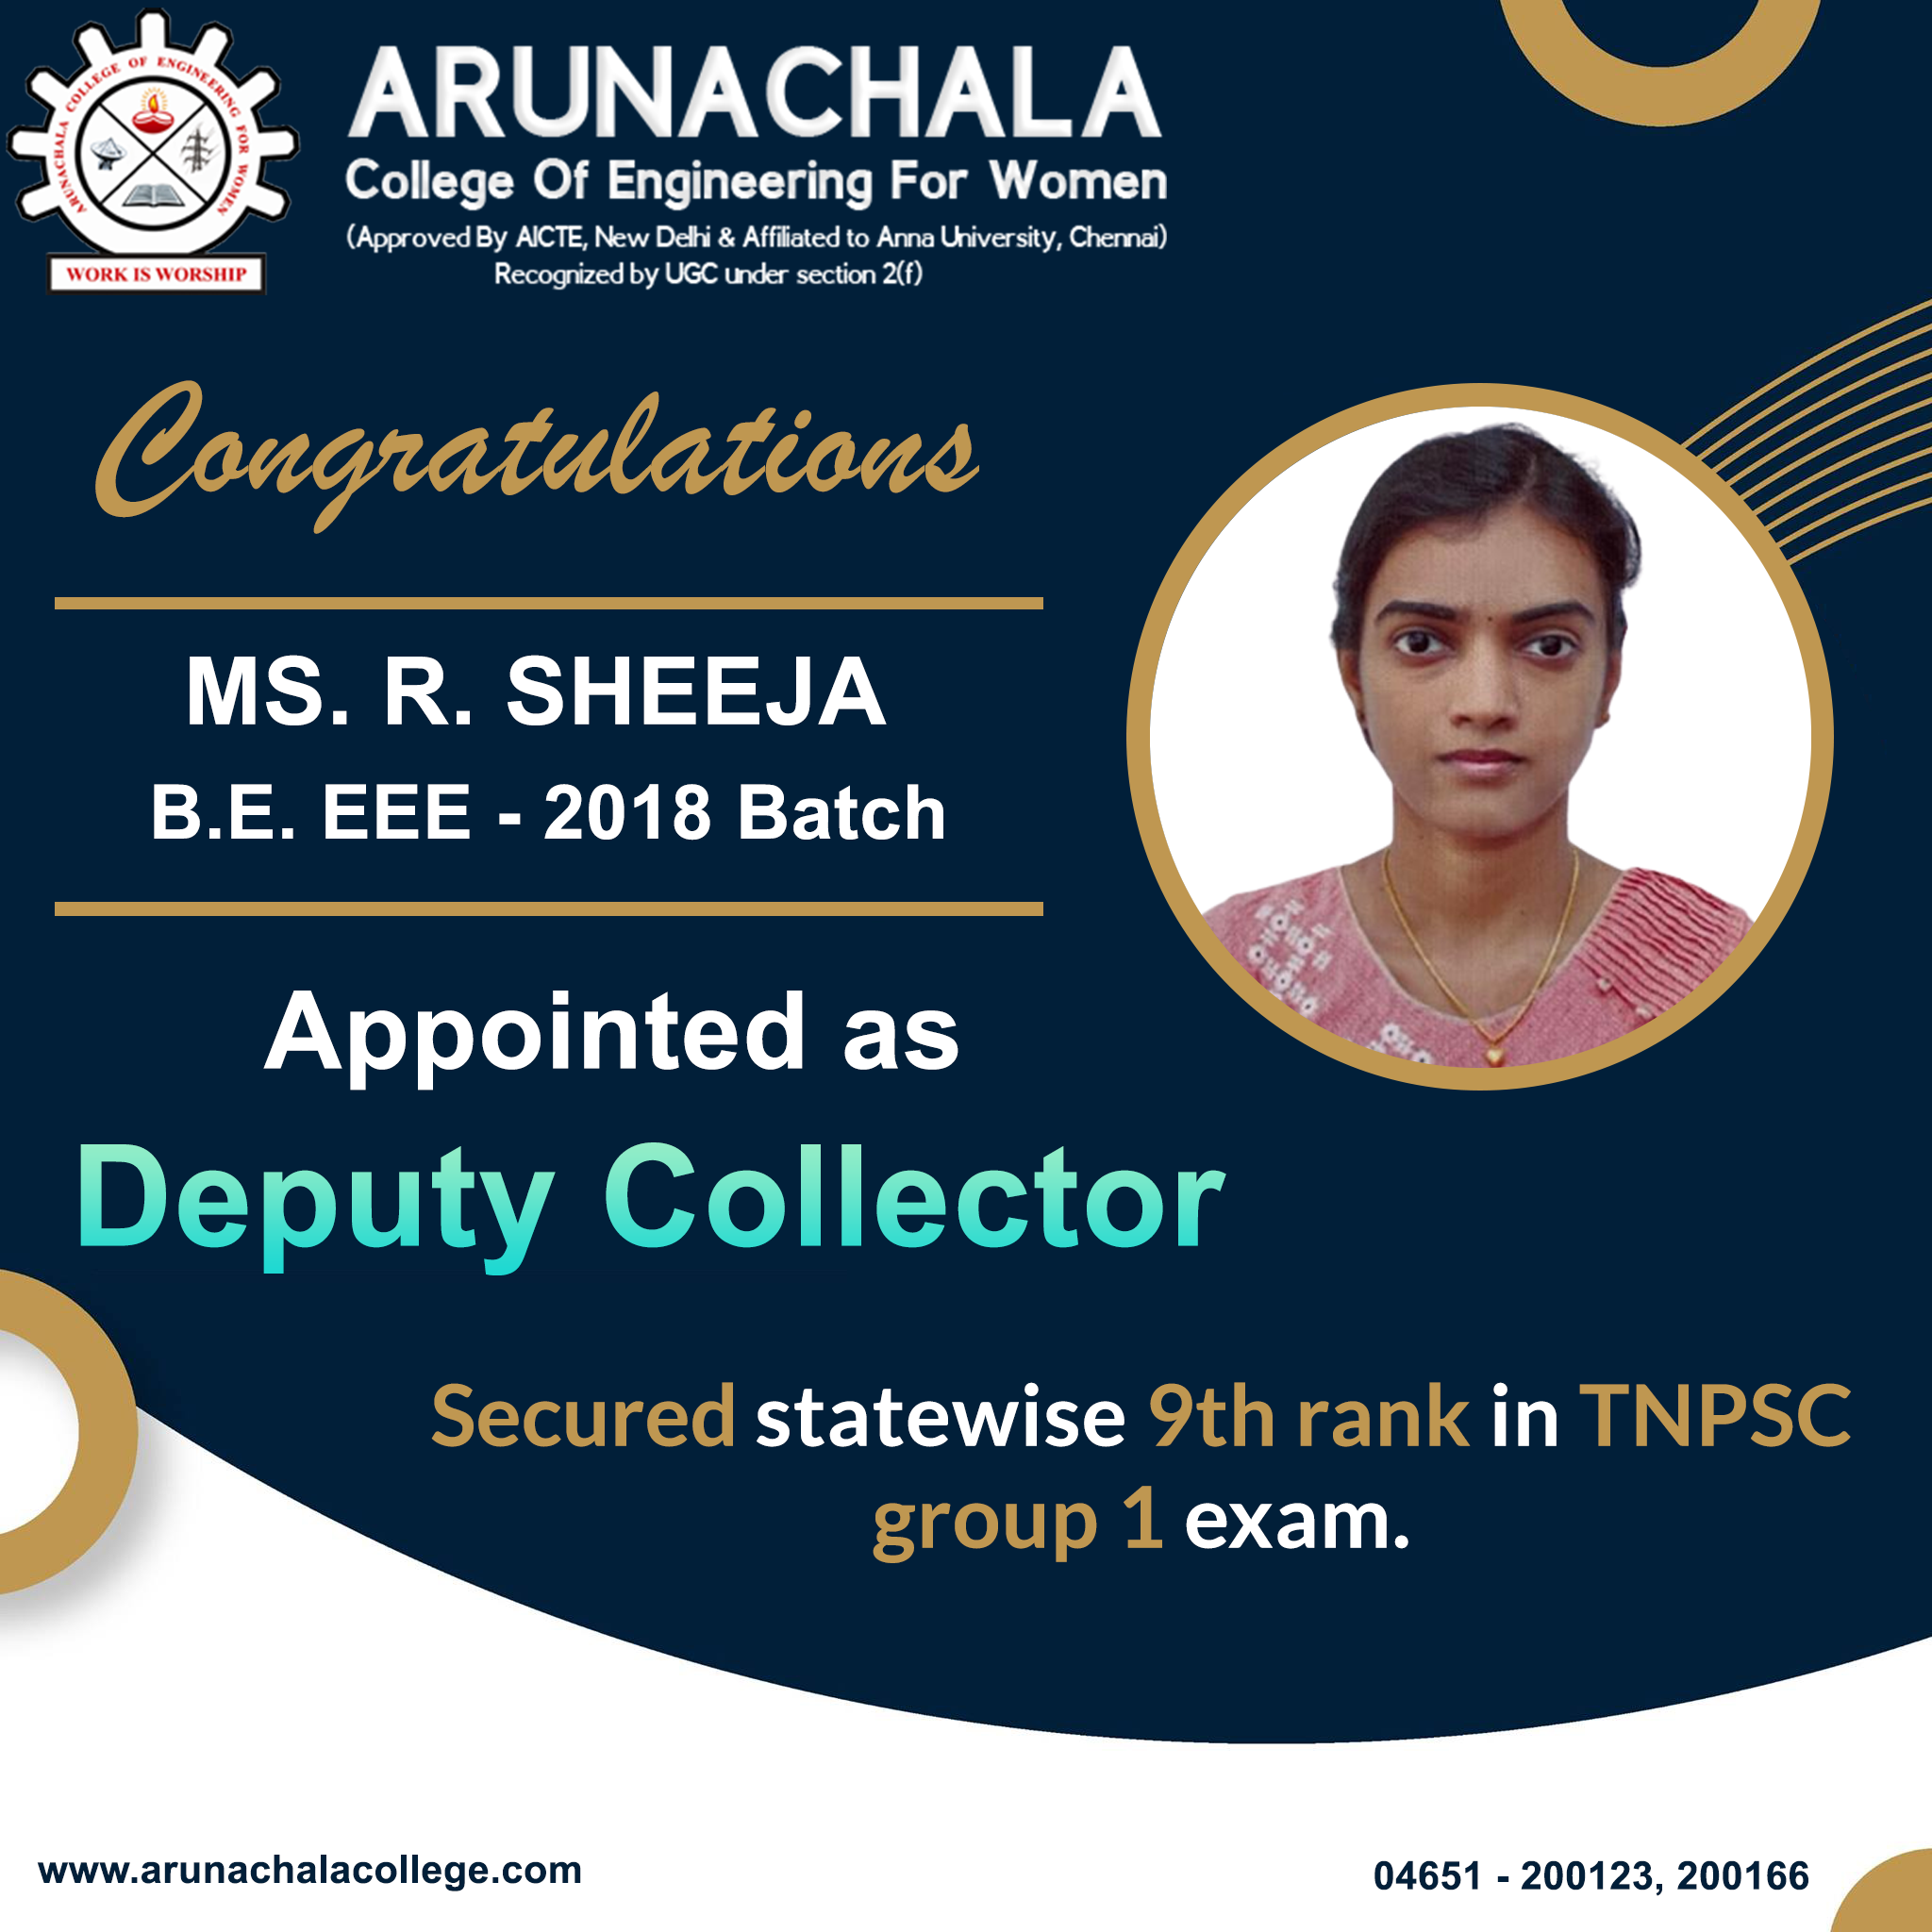 Appointed as deputy collector